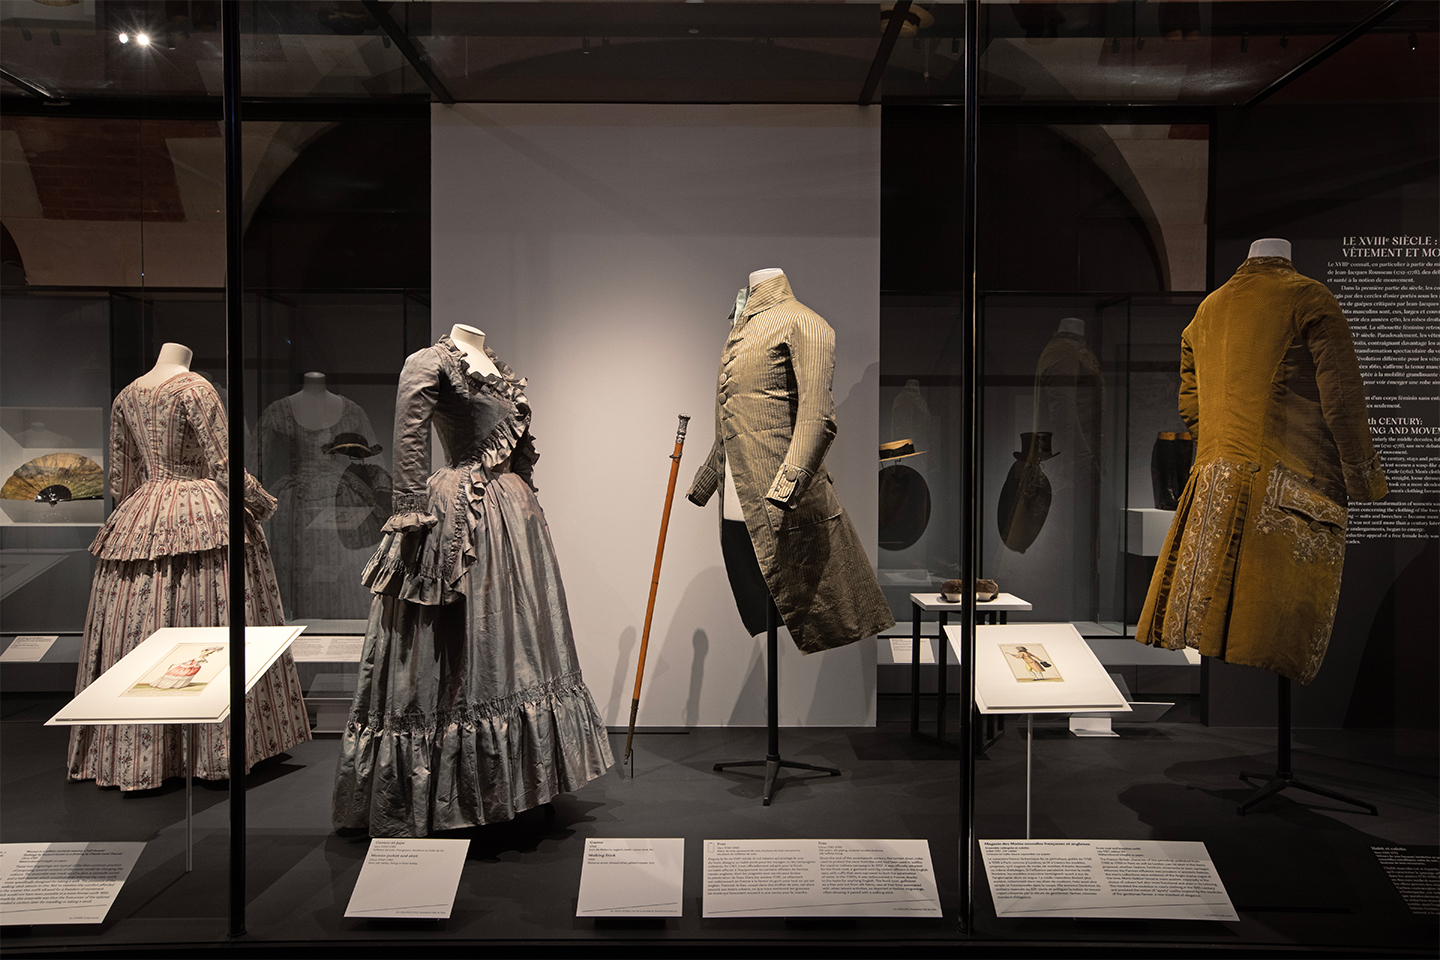 The Palais Galliera traces the history of fashion from the 18th century to the present. © Palais Galliera / Paris Musées, photo Gautier Deblonde